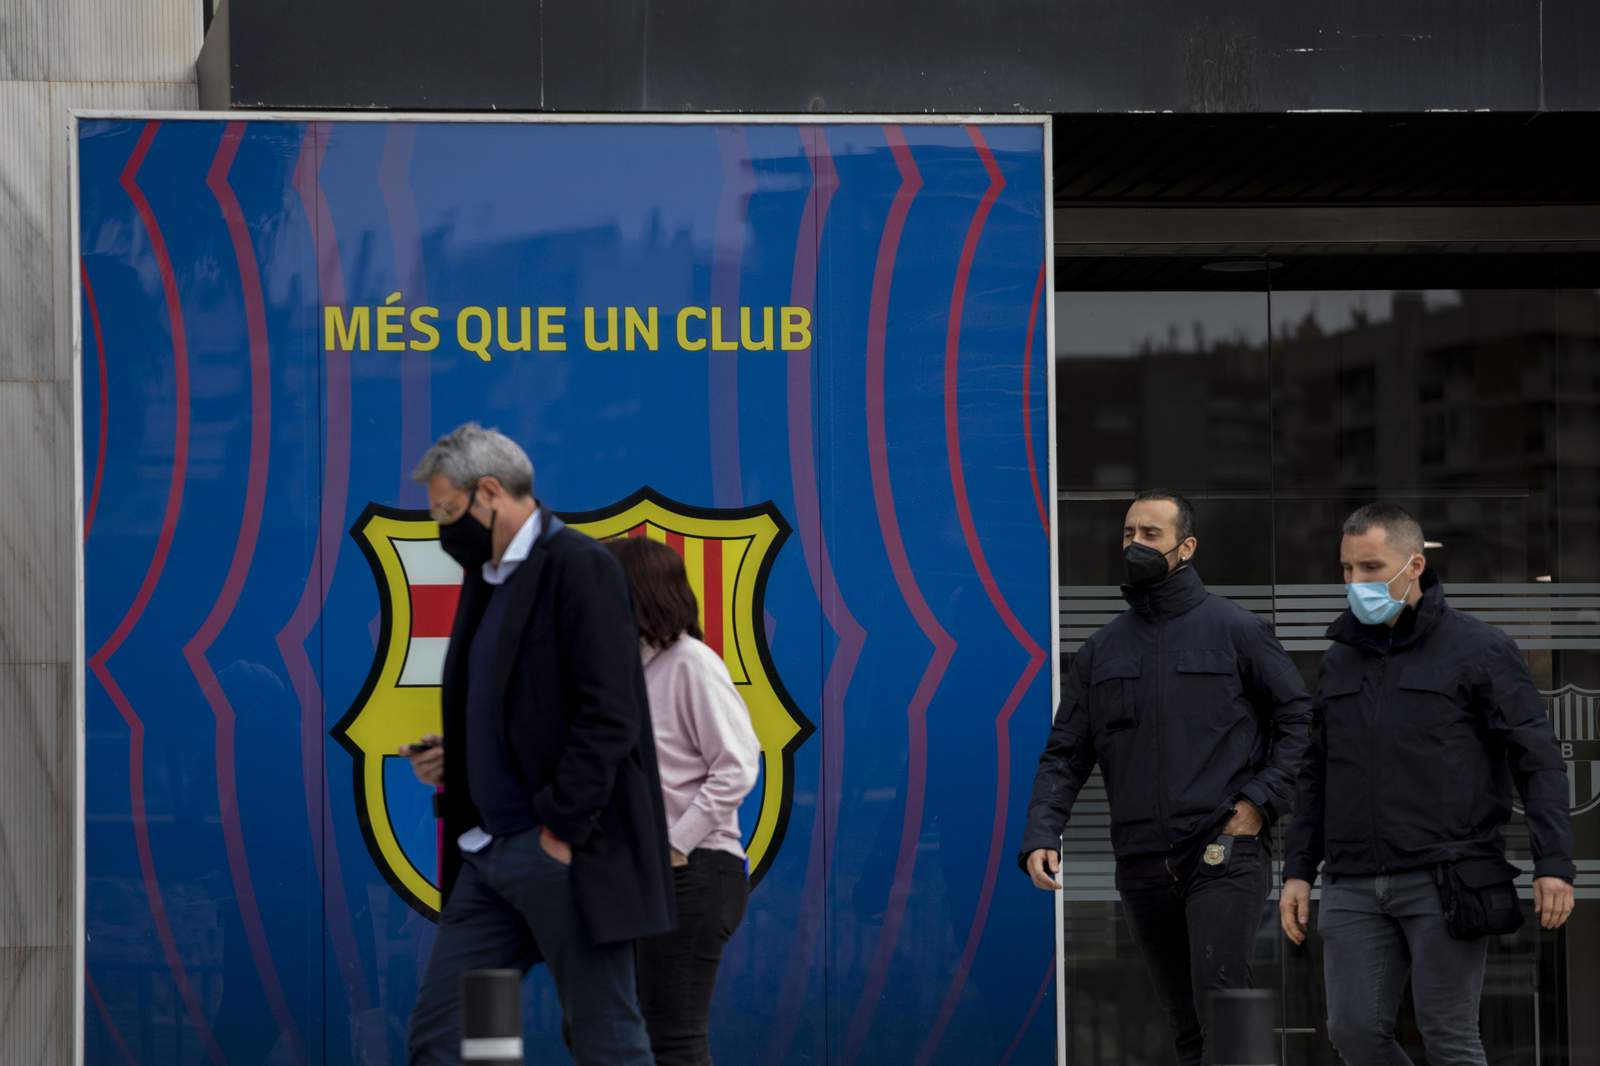 Police detain former Barcelona officials in search operation